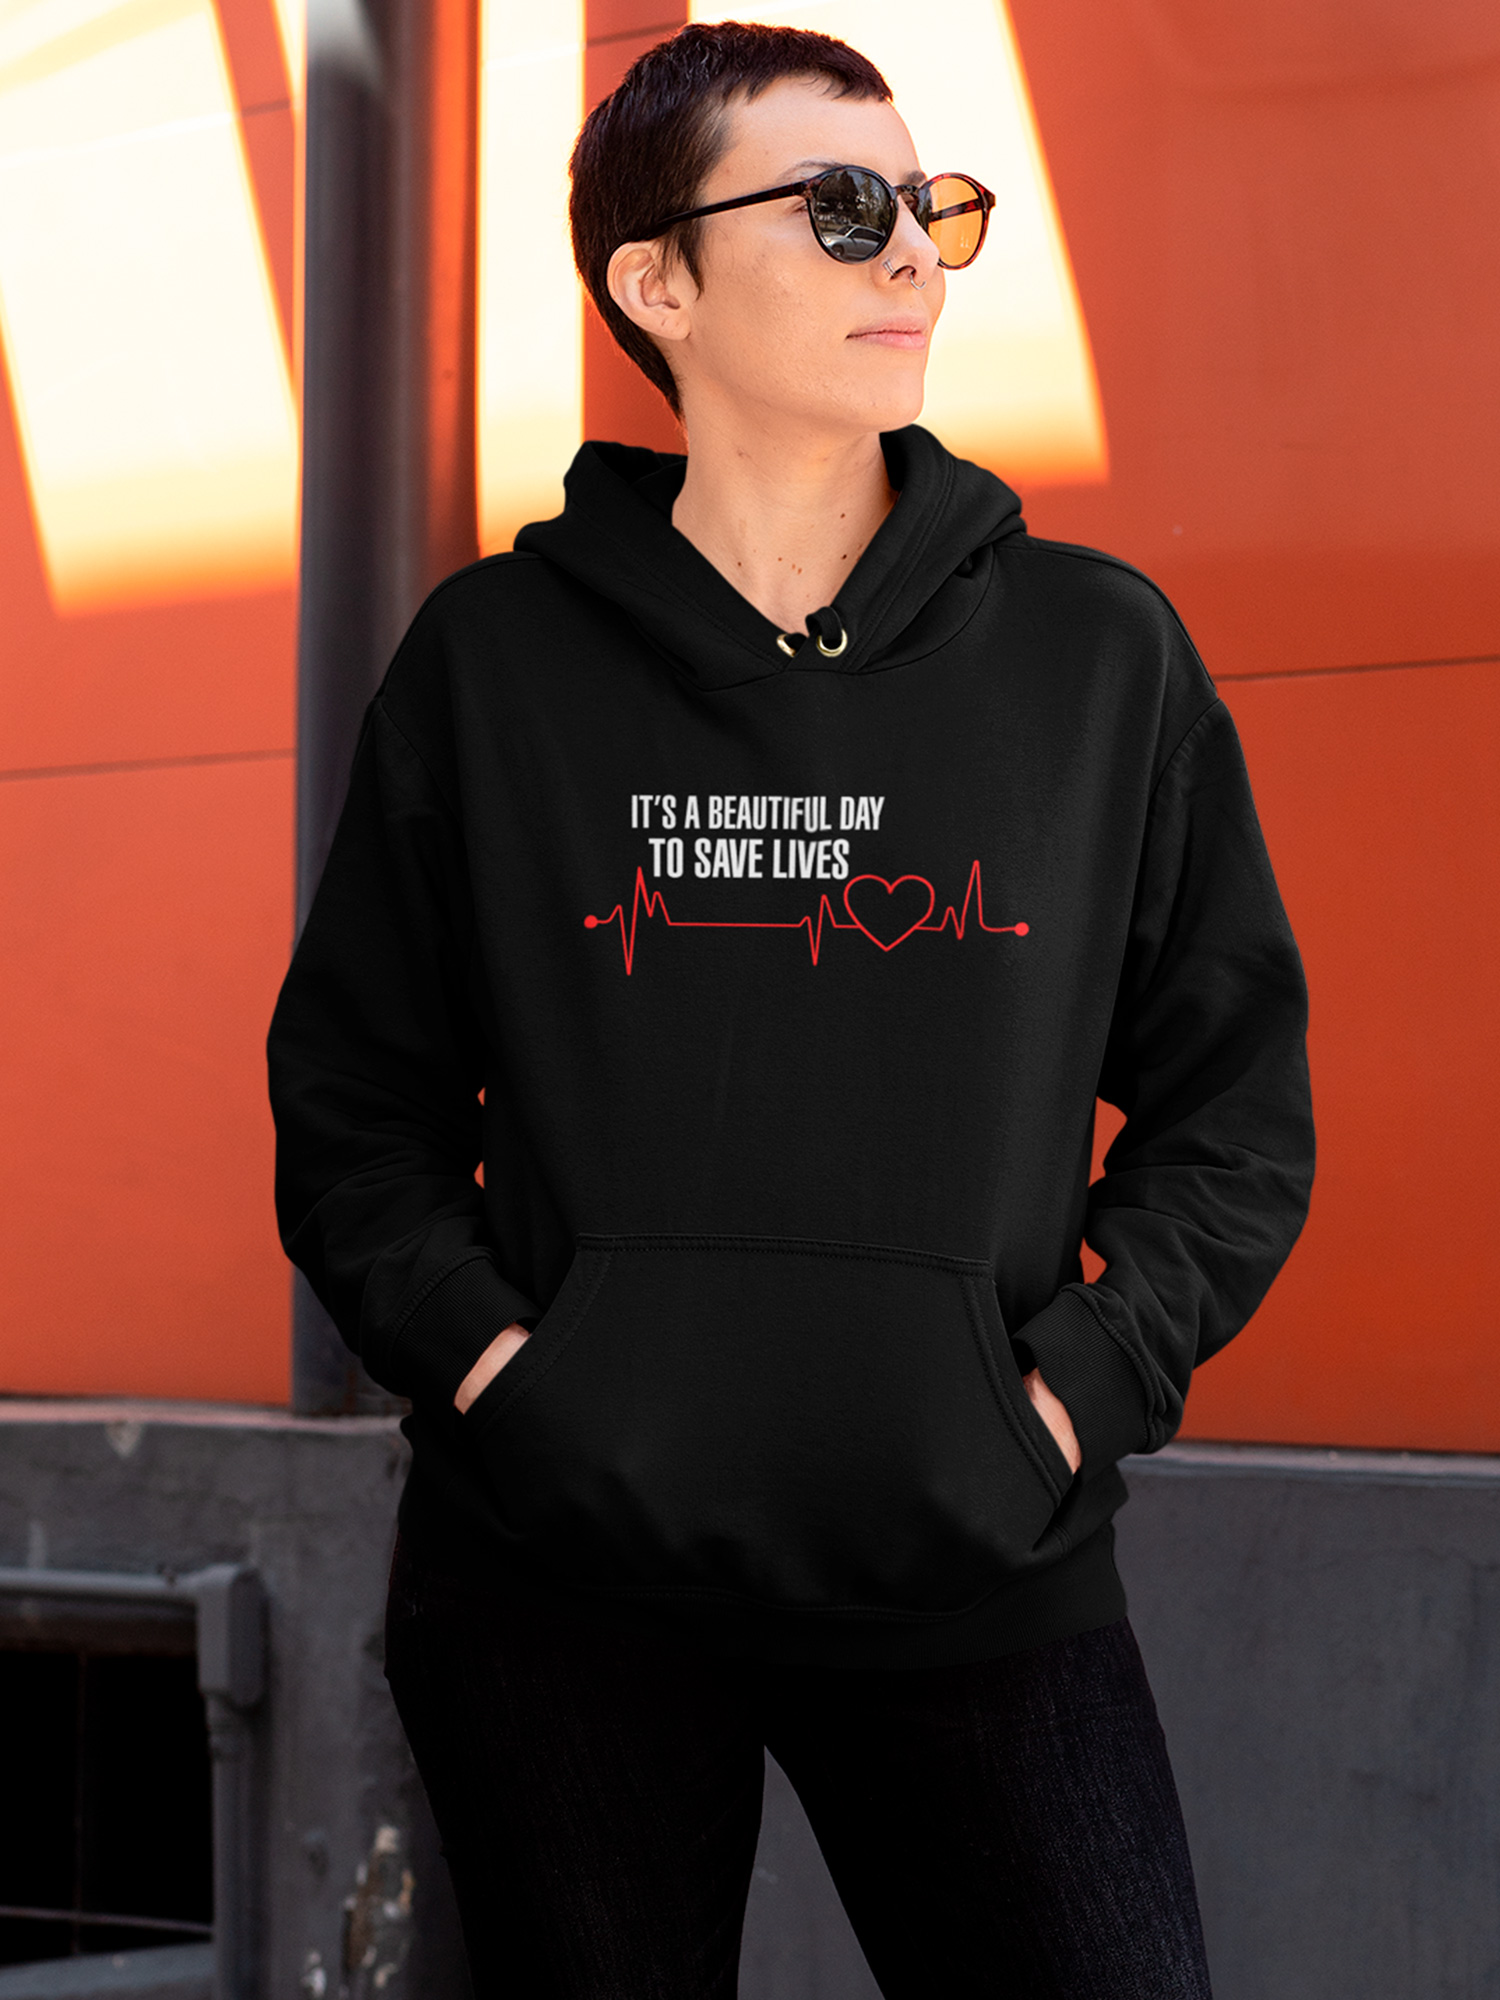 It\u2019s a beautiful day to save lives bleached hoodie Handmade graphic doctor show top